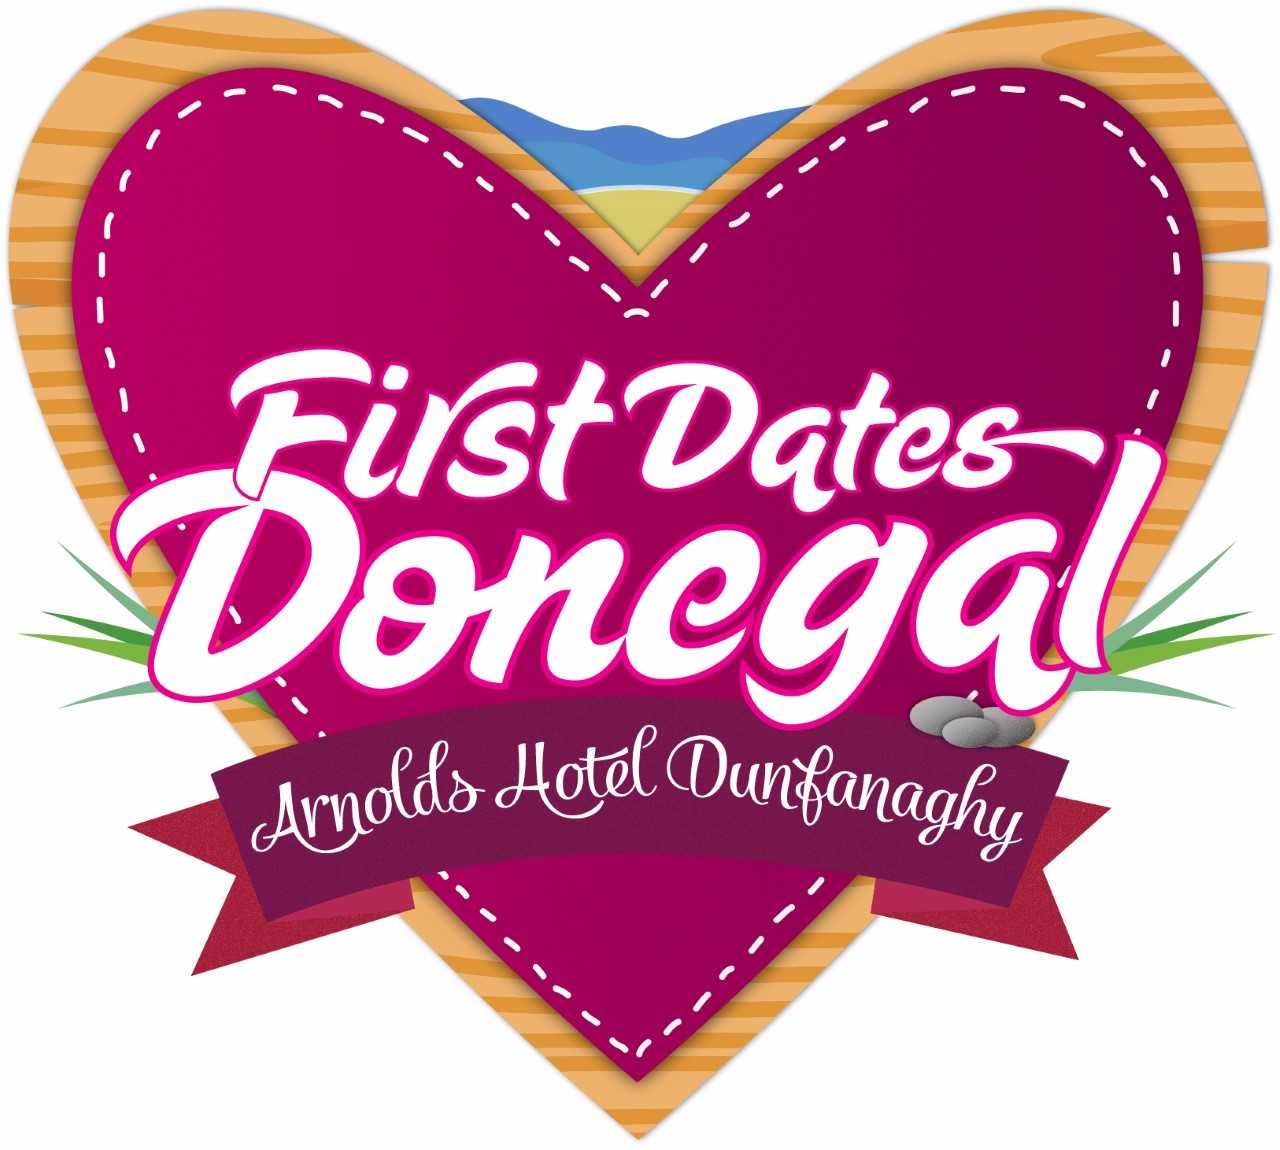 Food & drink events in Donegal, Ireland - Eventbrite